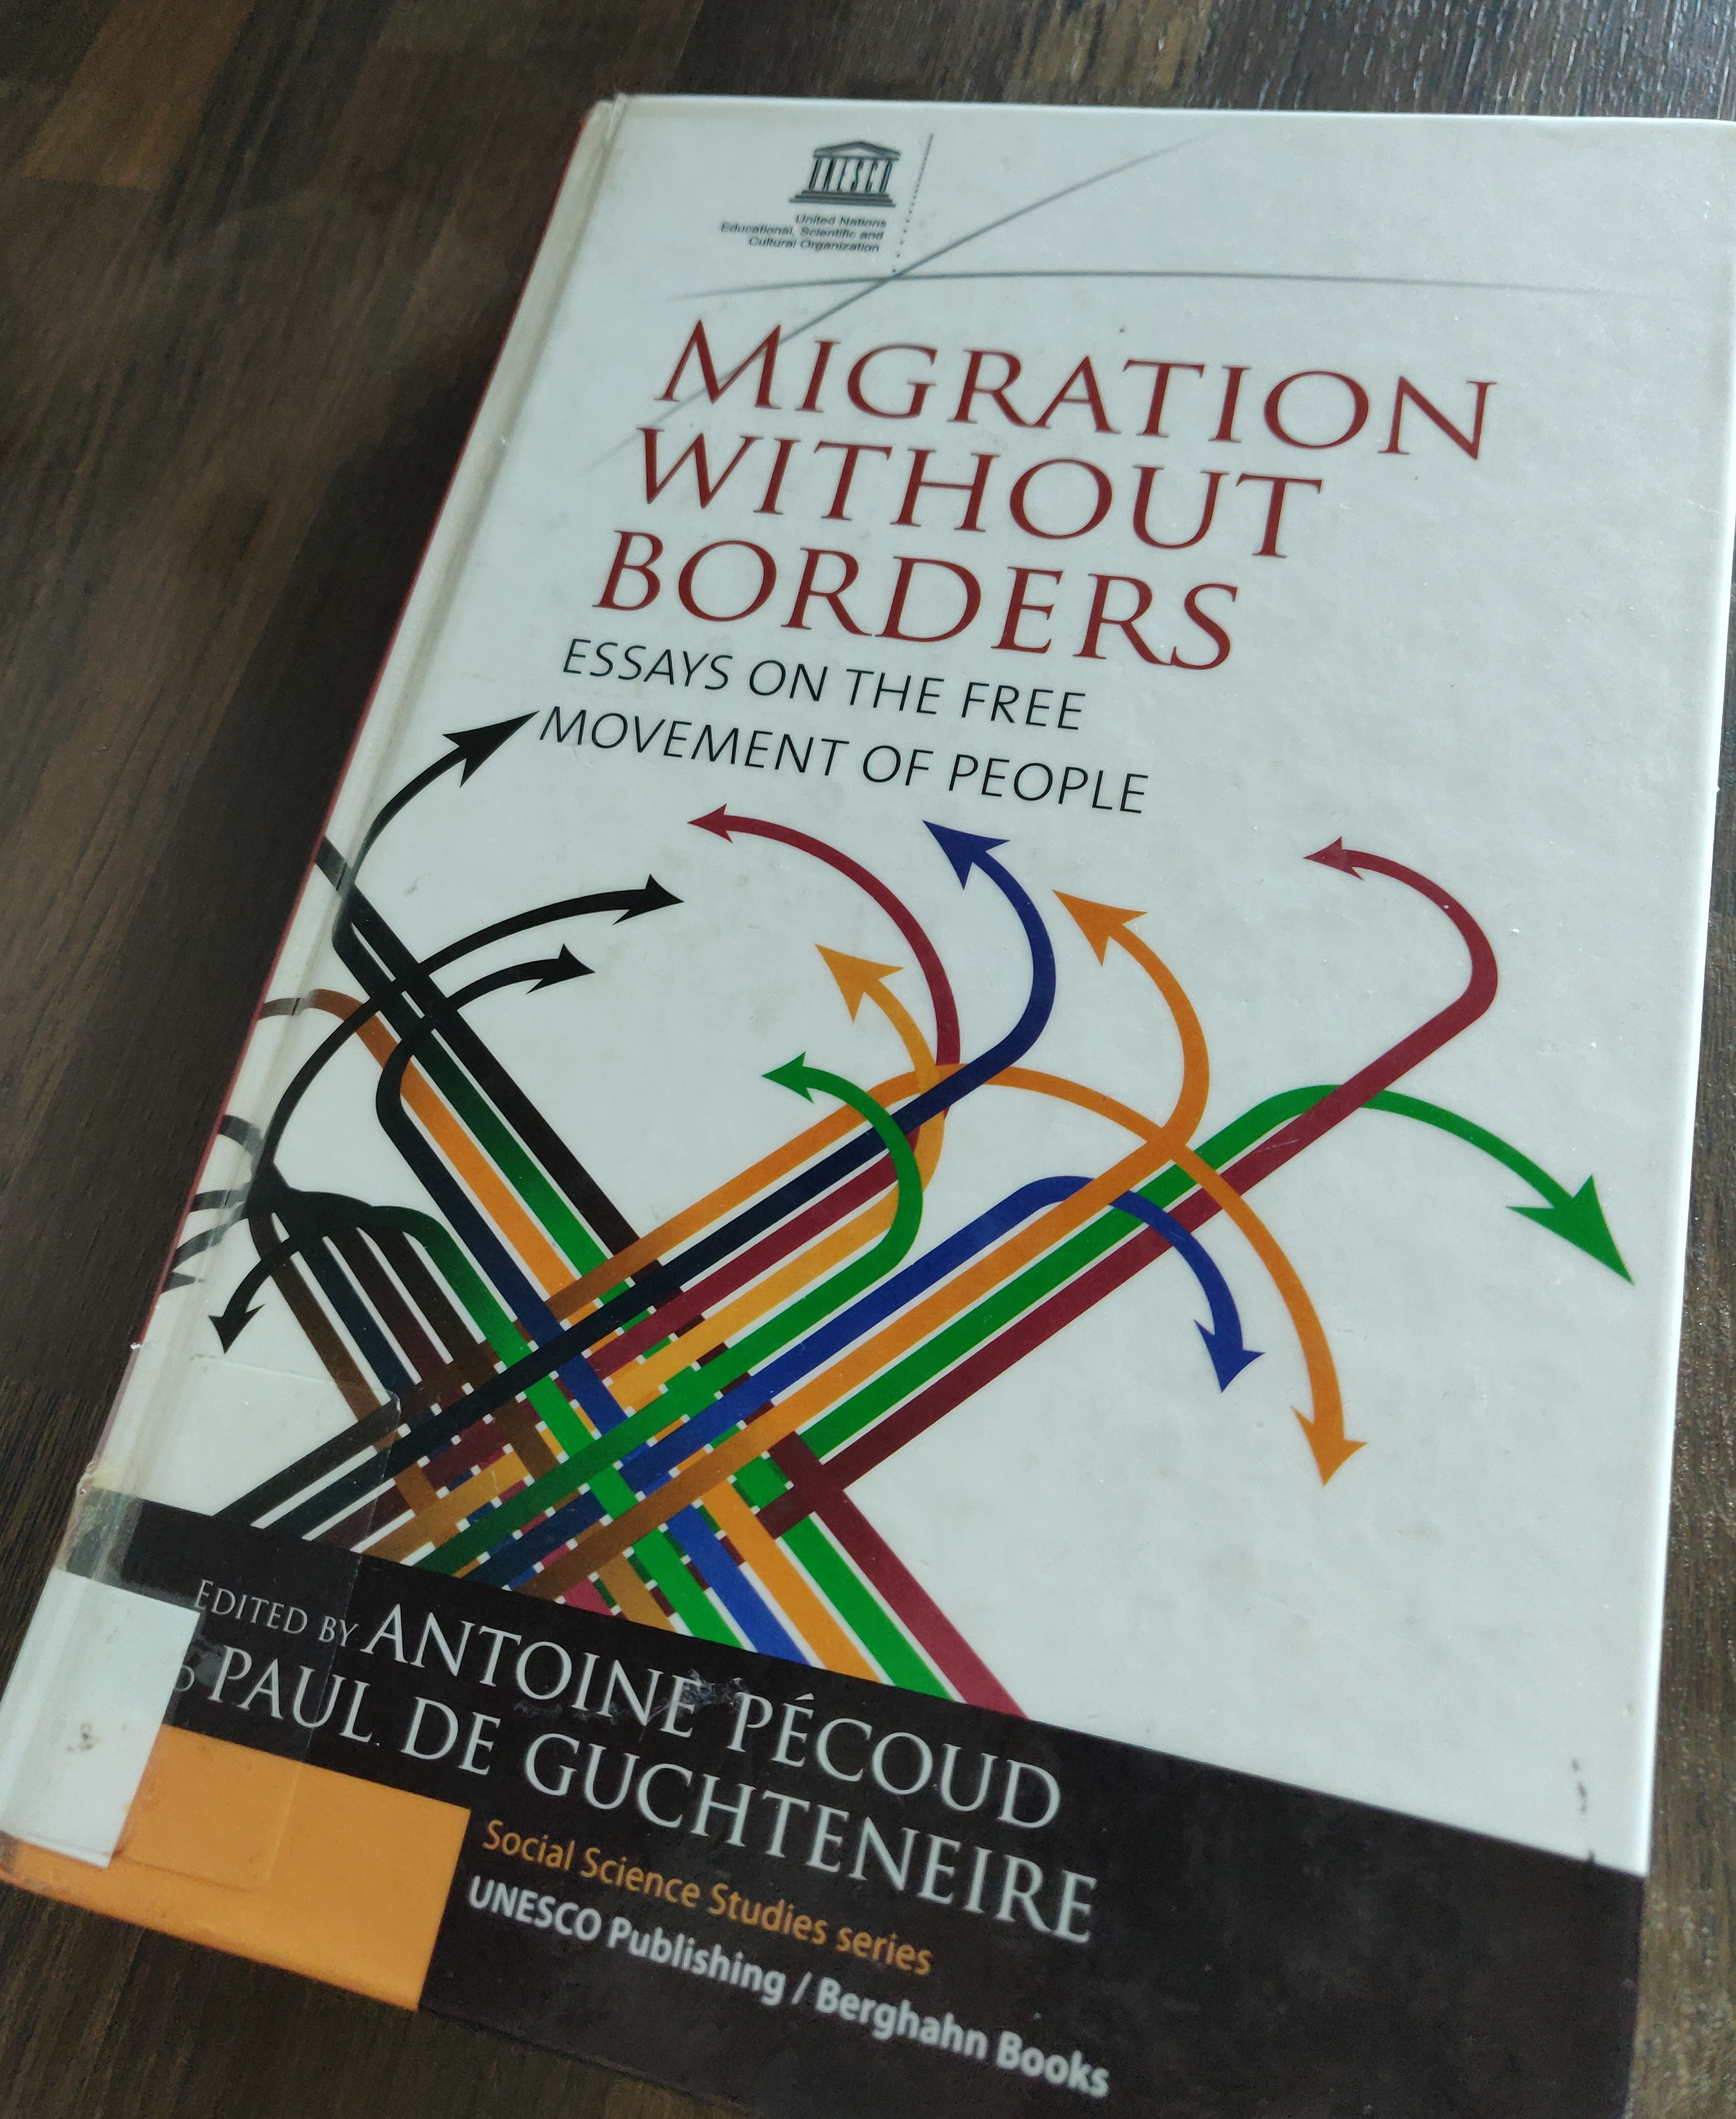 “Migration Without Borders” cover